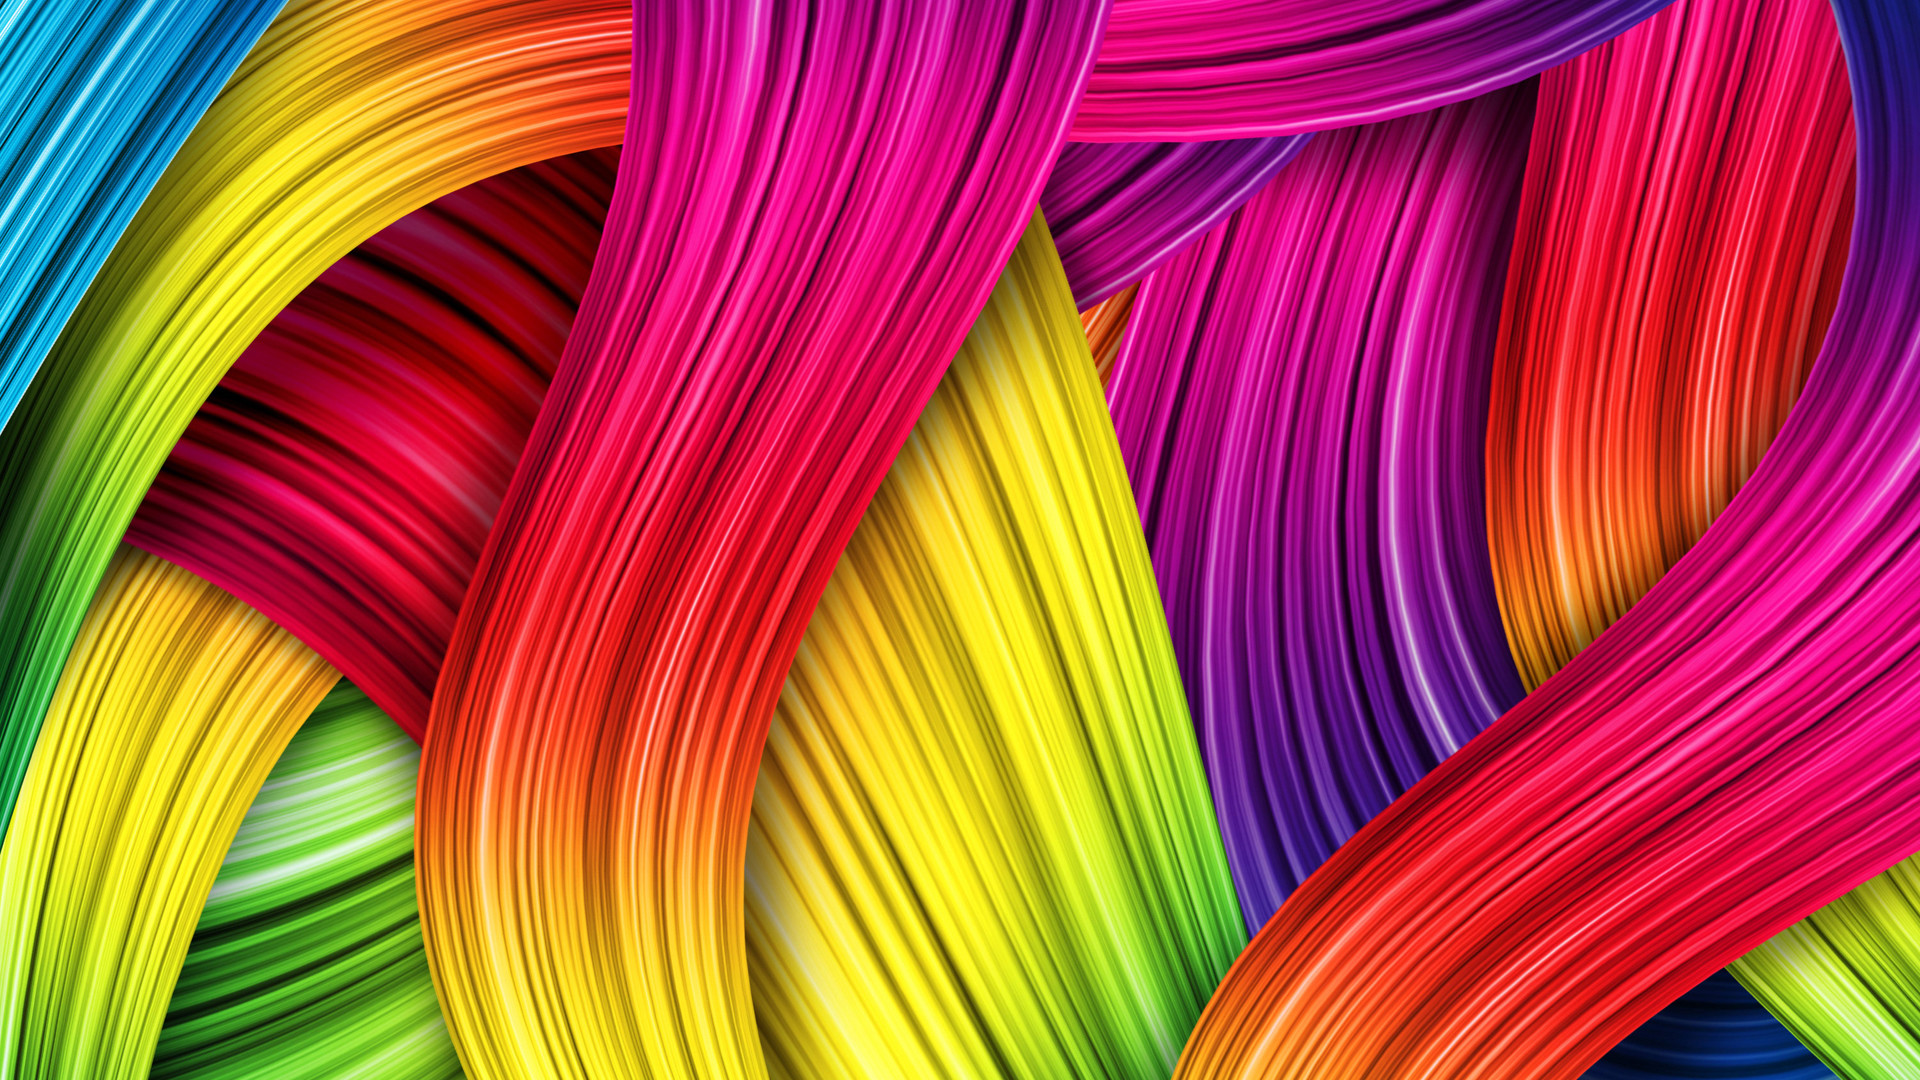 Animated Colorful Thread Wallpaper With Resolutions 19201080 Pixel